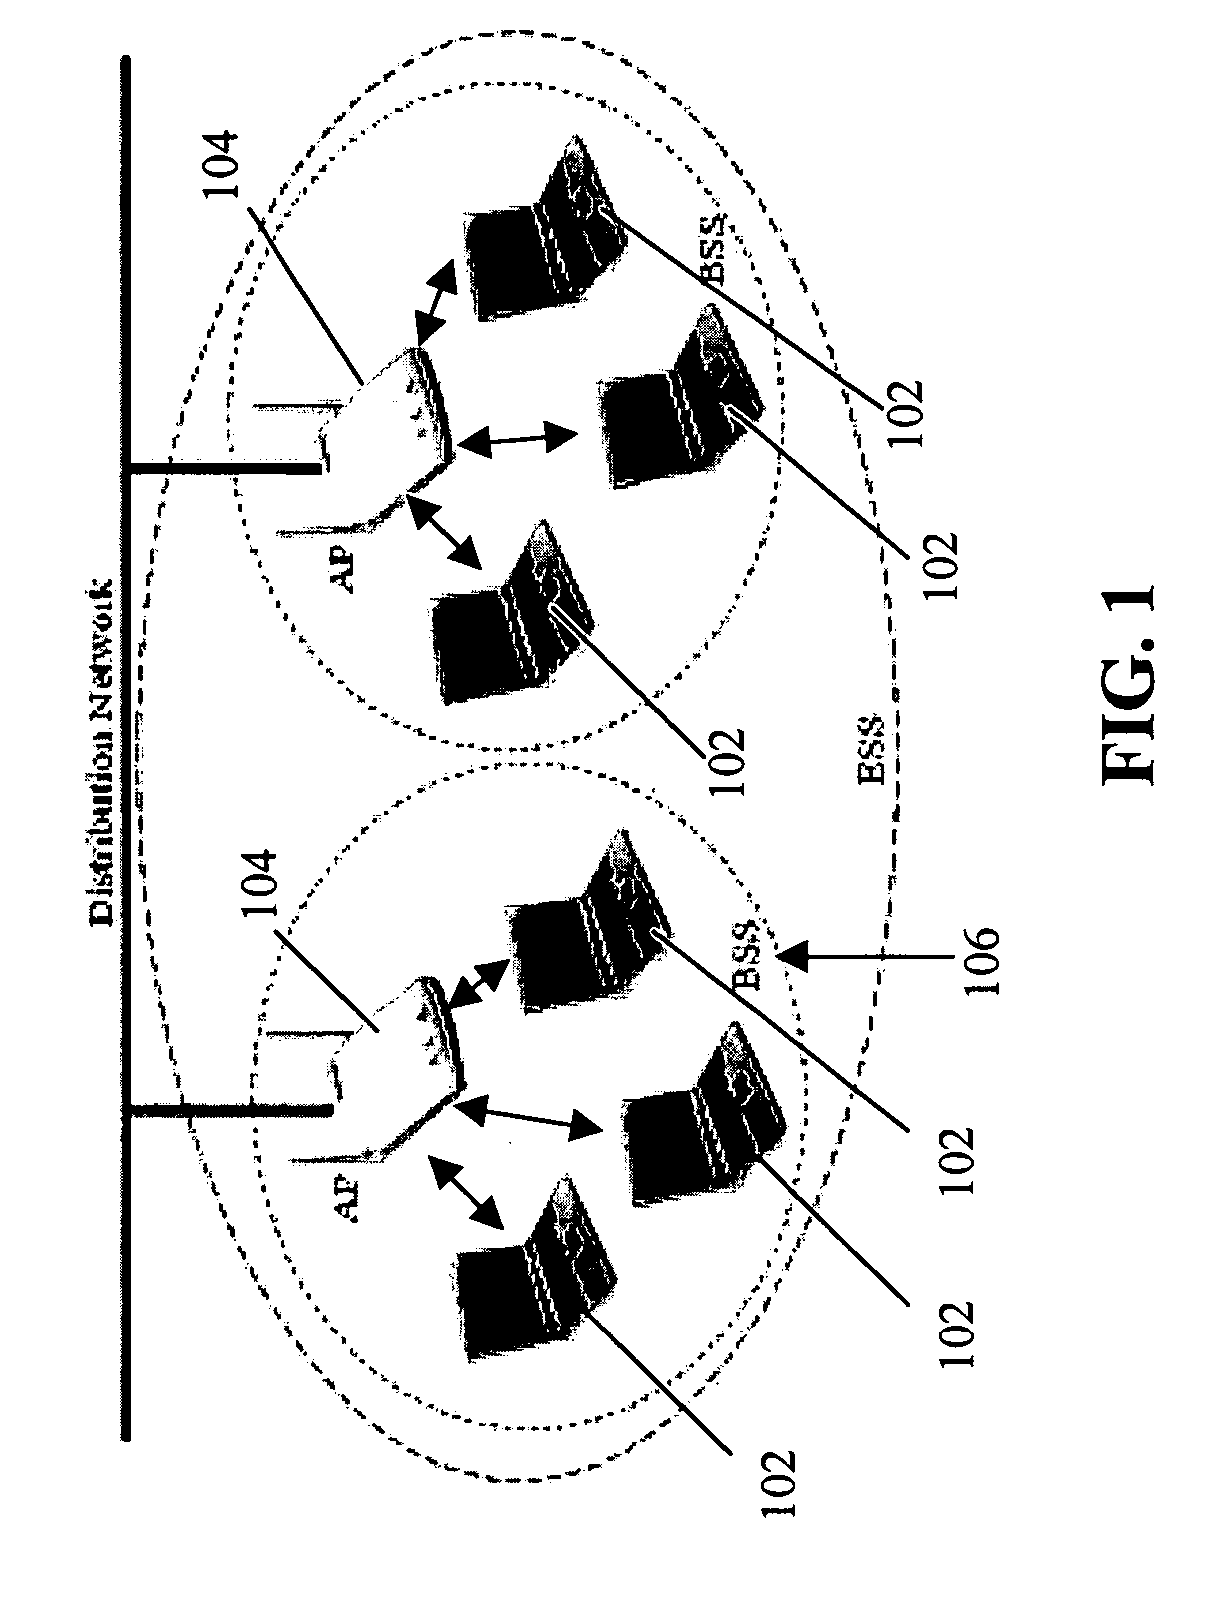 Methods and systems for reducing MAC layer handoff latency in wireless networks